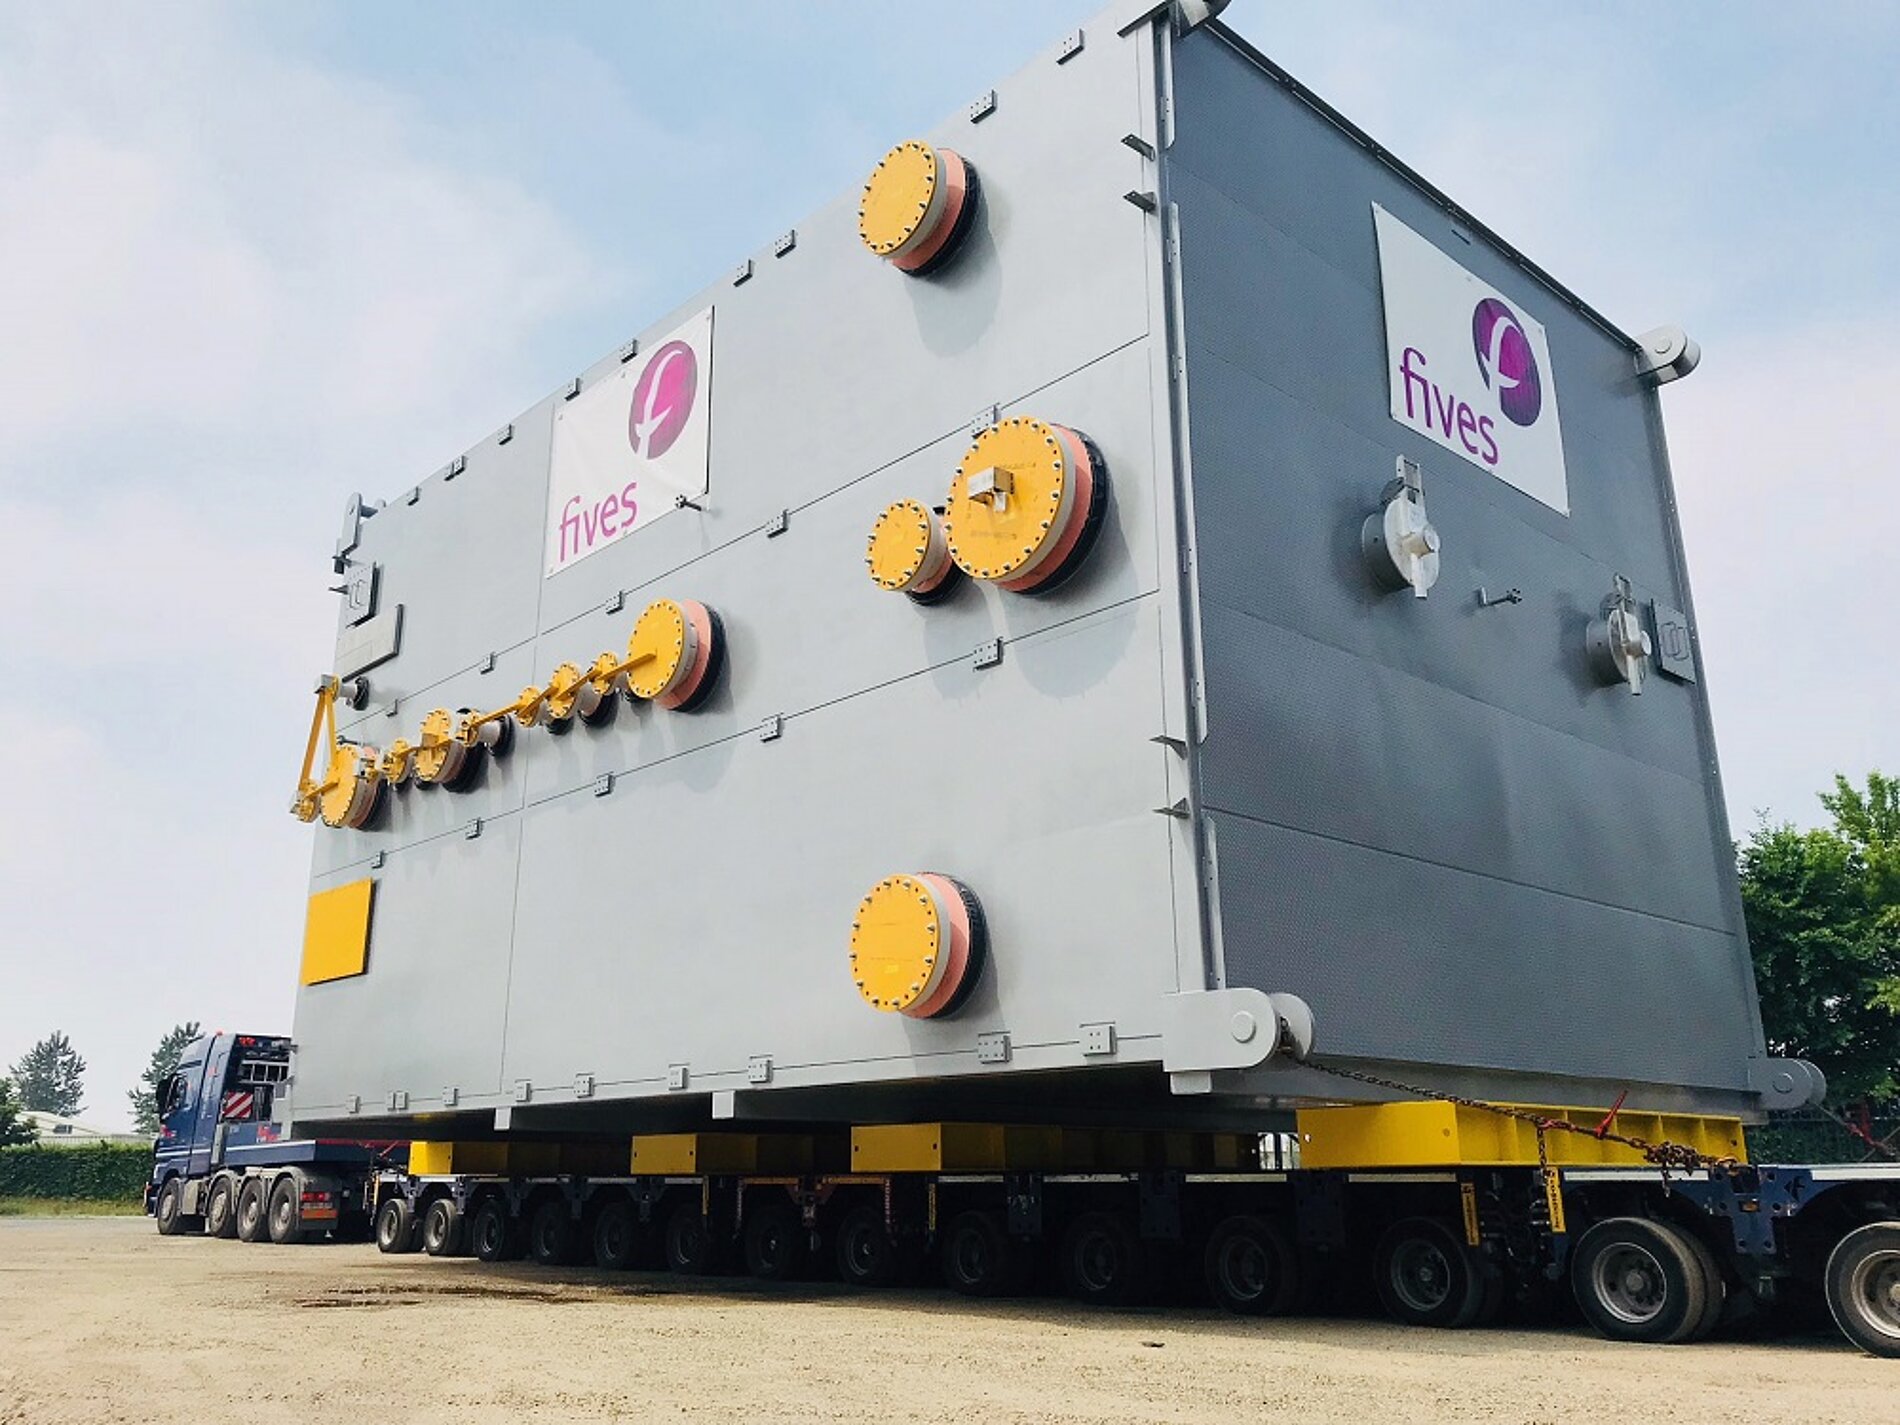 Fives has been awarded a contract for the supply of 18 Cold Boxes and 36 Brazed Aluminium Heat Exchangers in Saudi Arabia